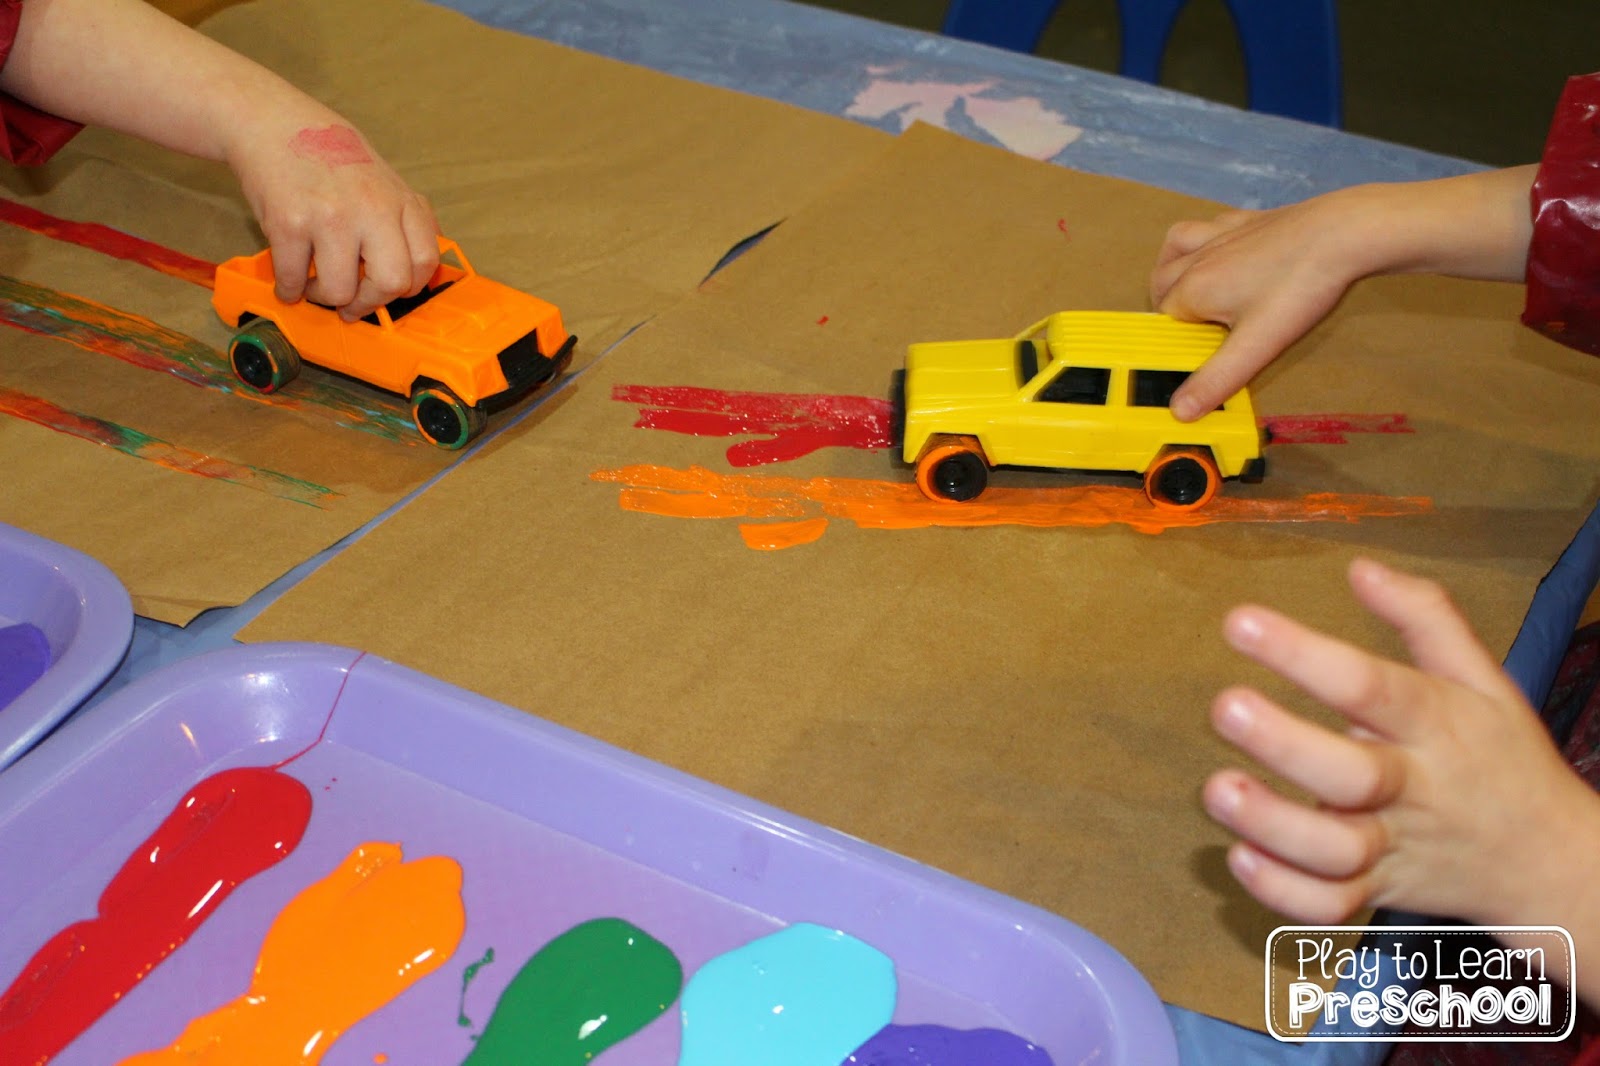 Play to Learn Preschool: Painting with Cars